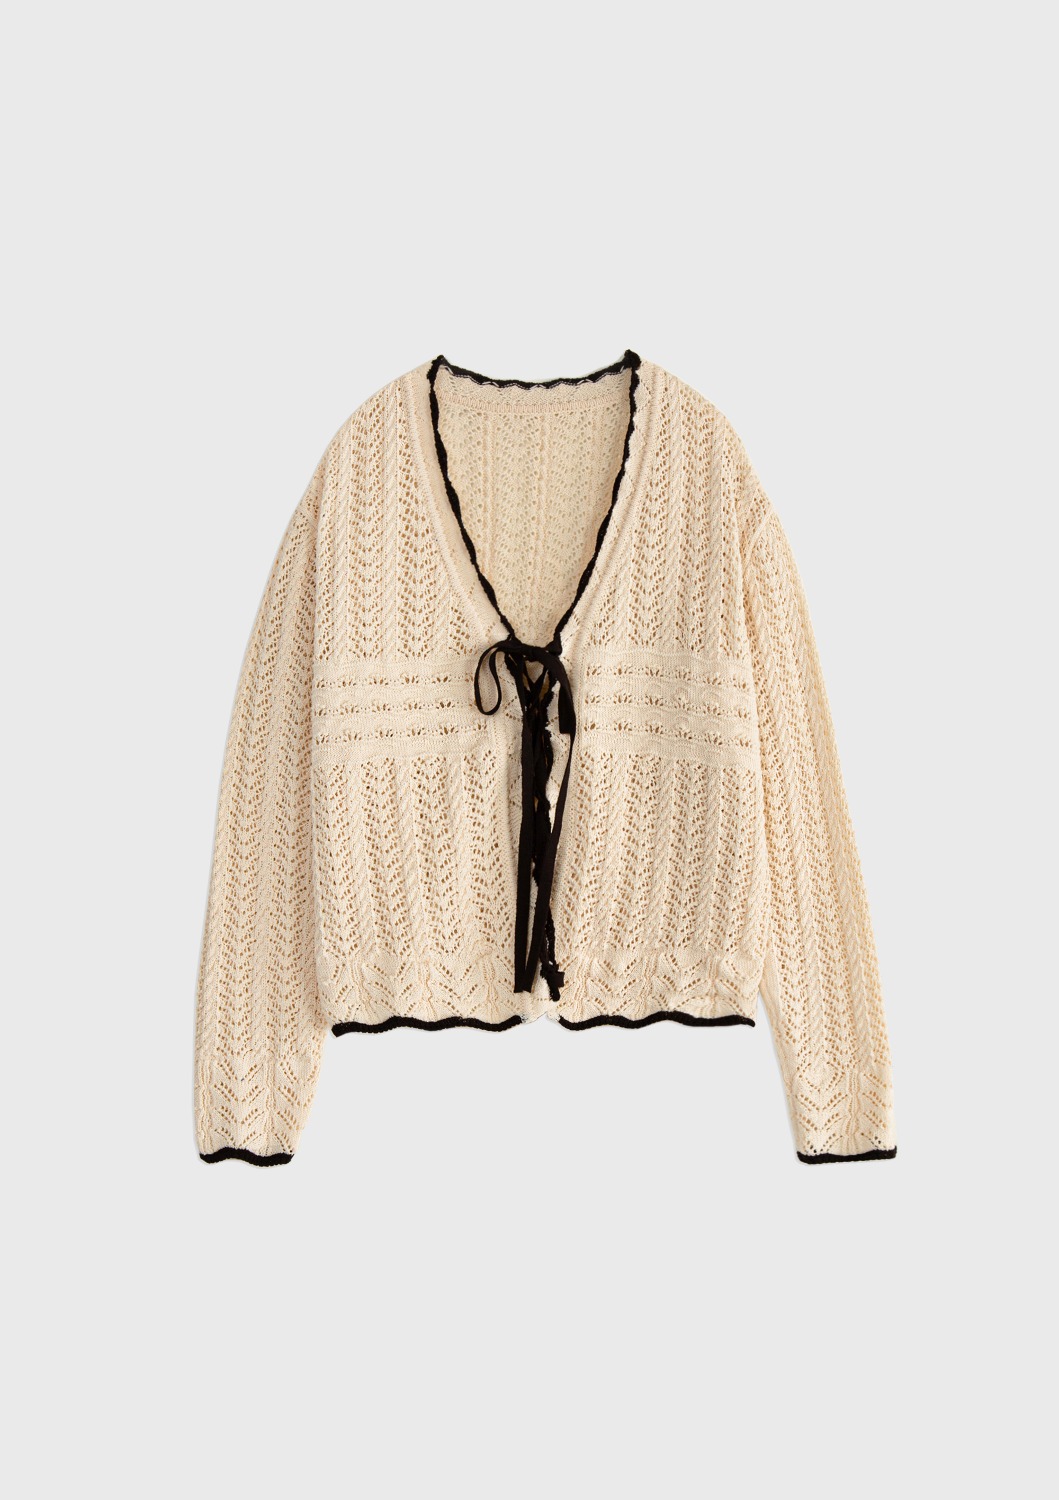 Mused Lace Crochet Tie Knit Cardigan - Natural Black